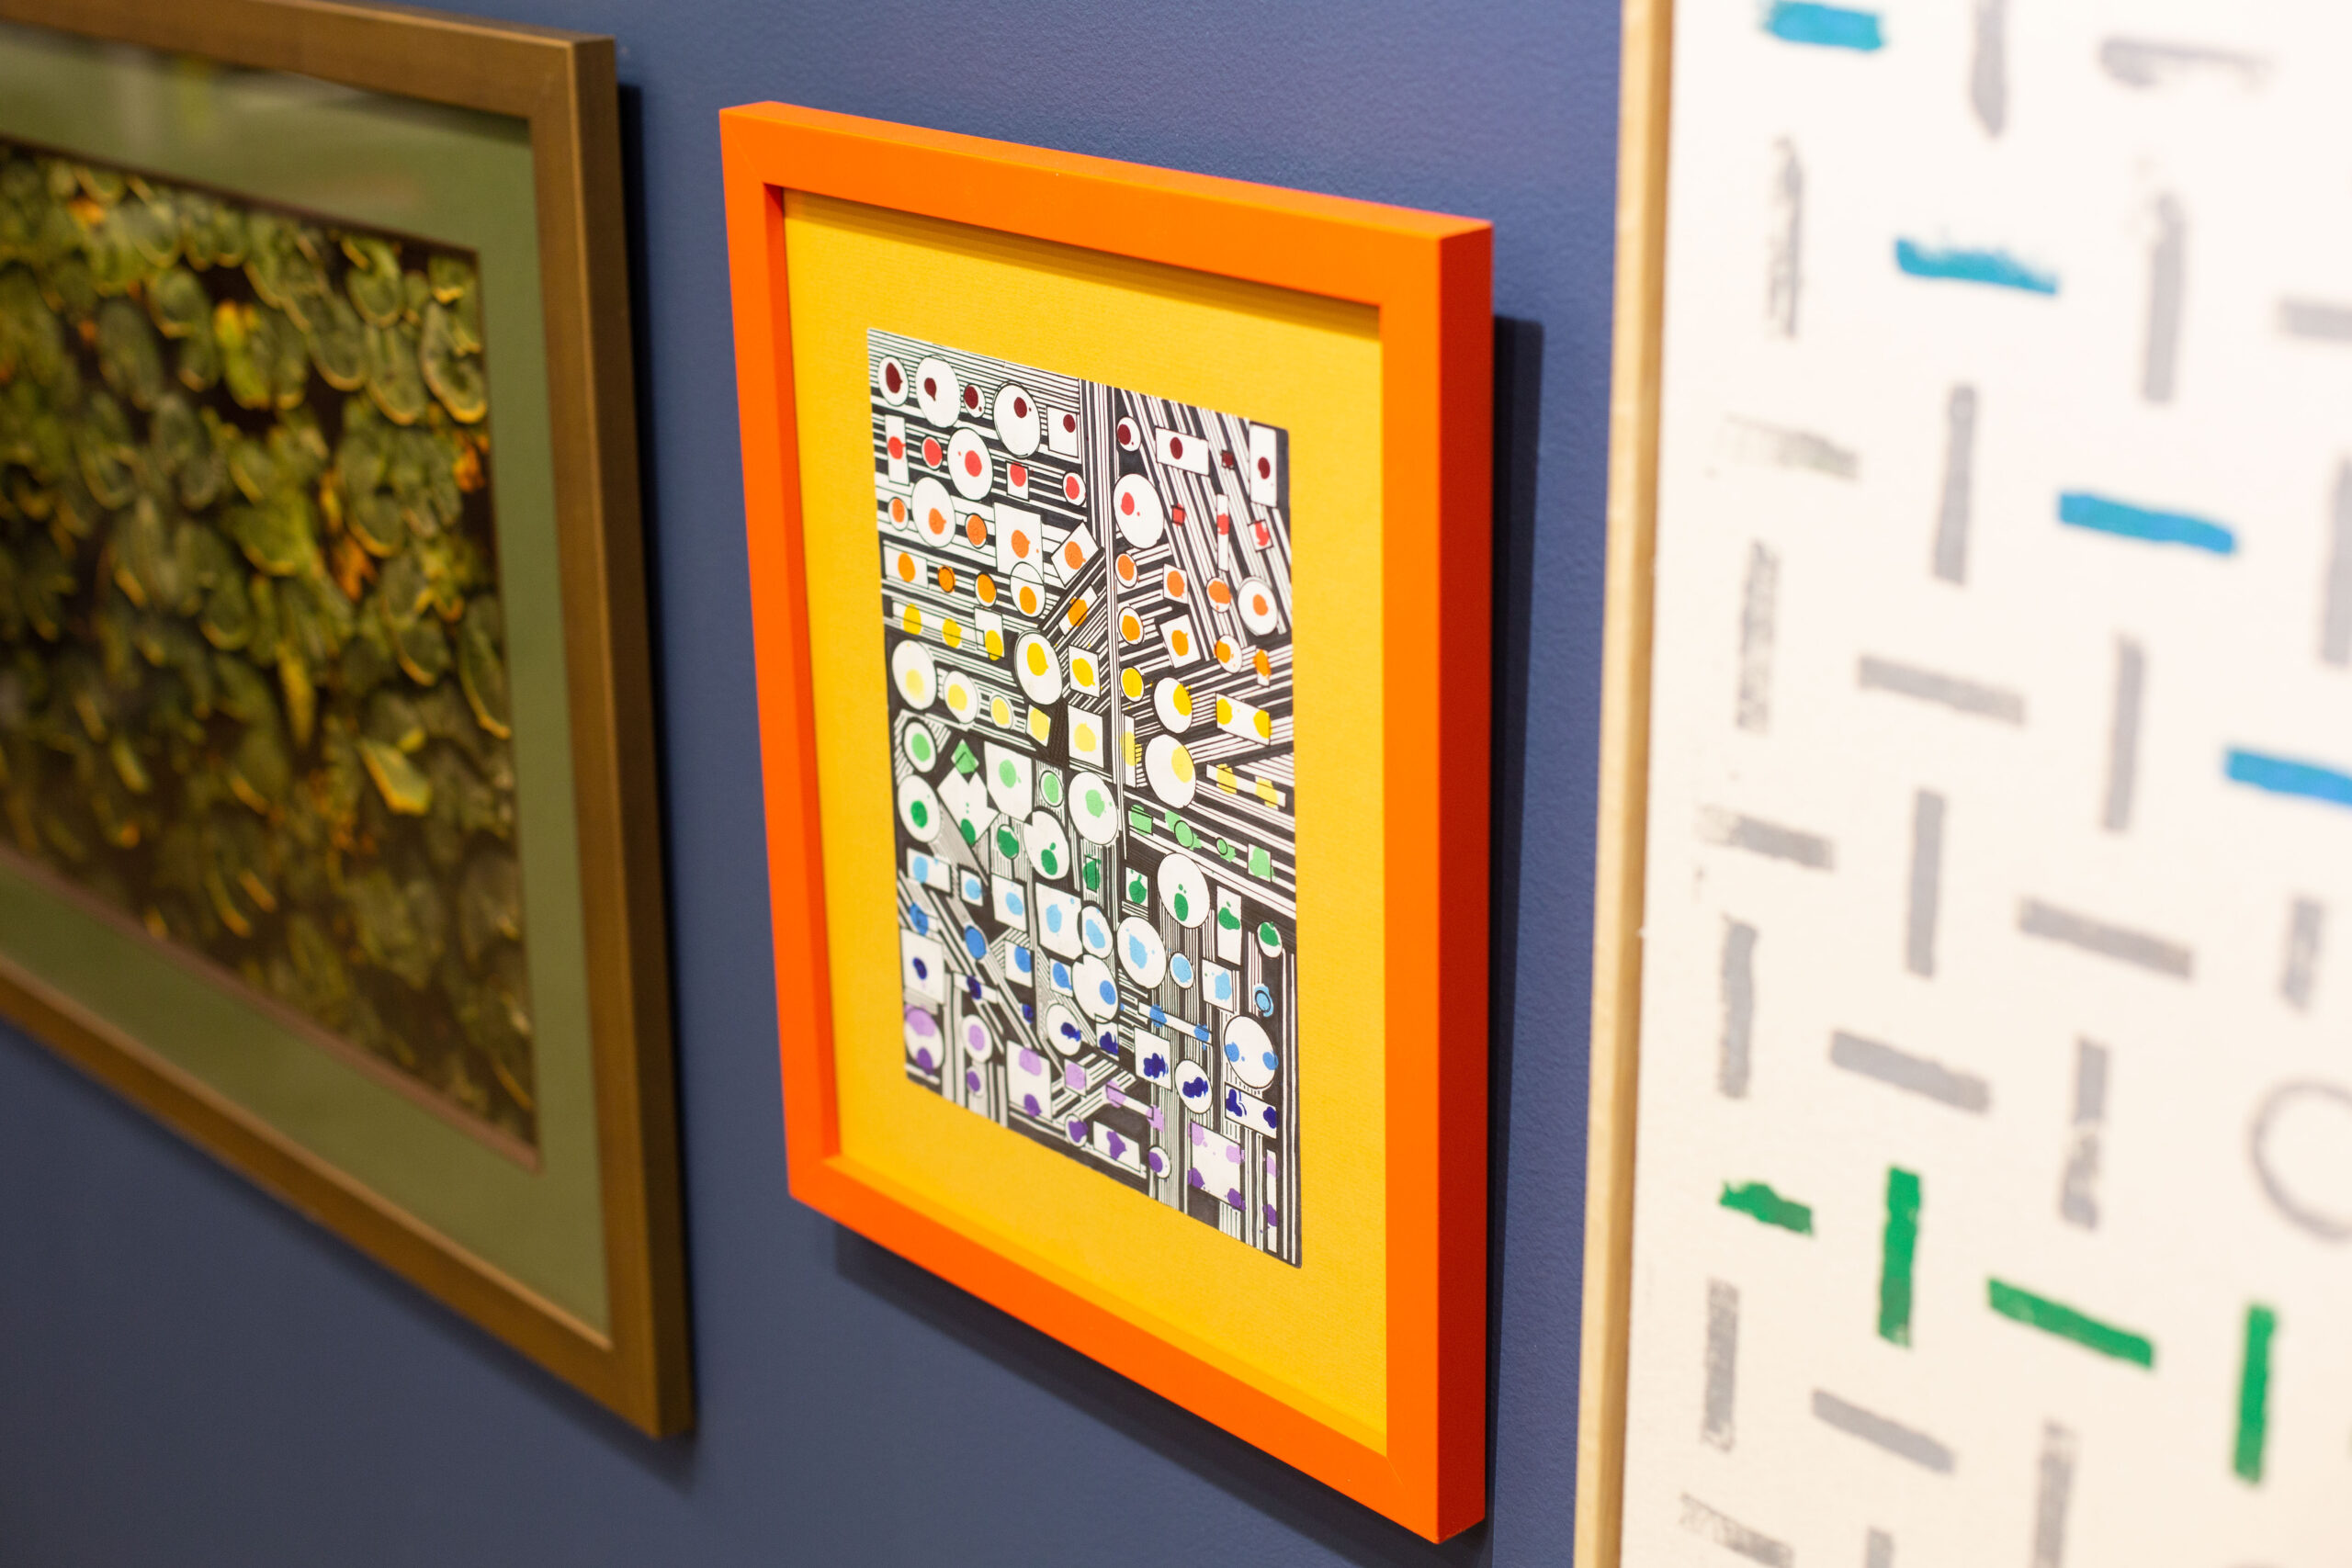 A closeup angle shows three pieces of art, focusing on the drawing in the middle in a bright orange frame. The photos hang in the Peterson Picture Co. gallery.